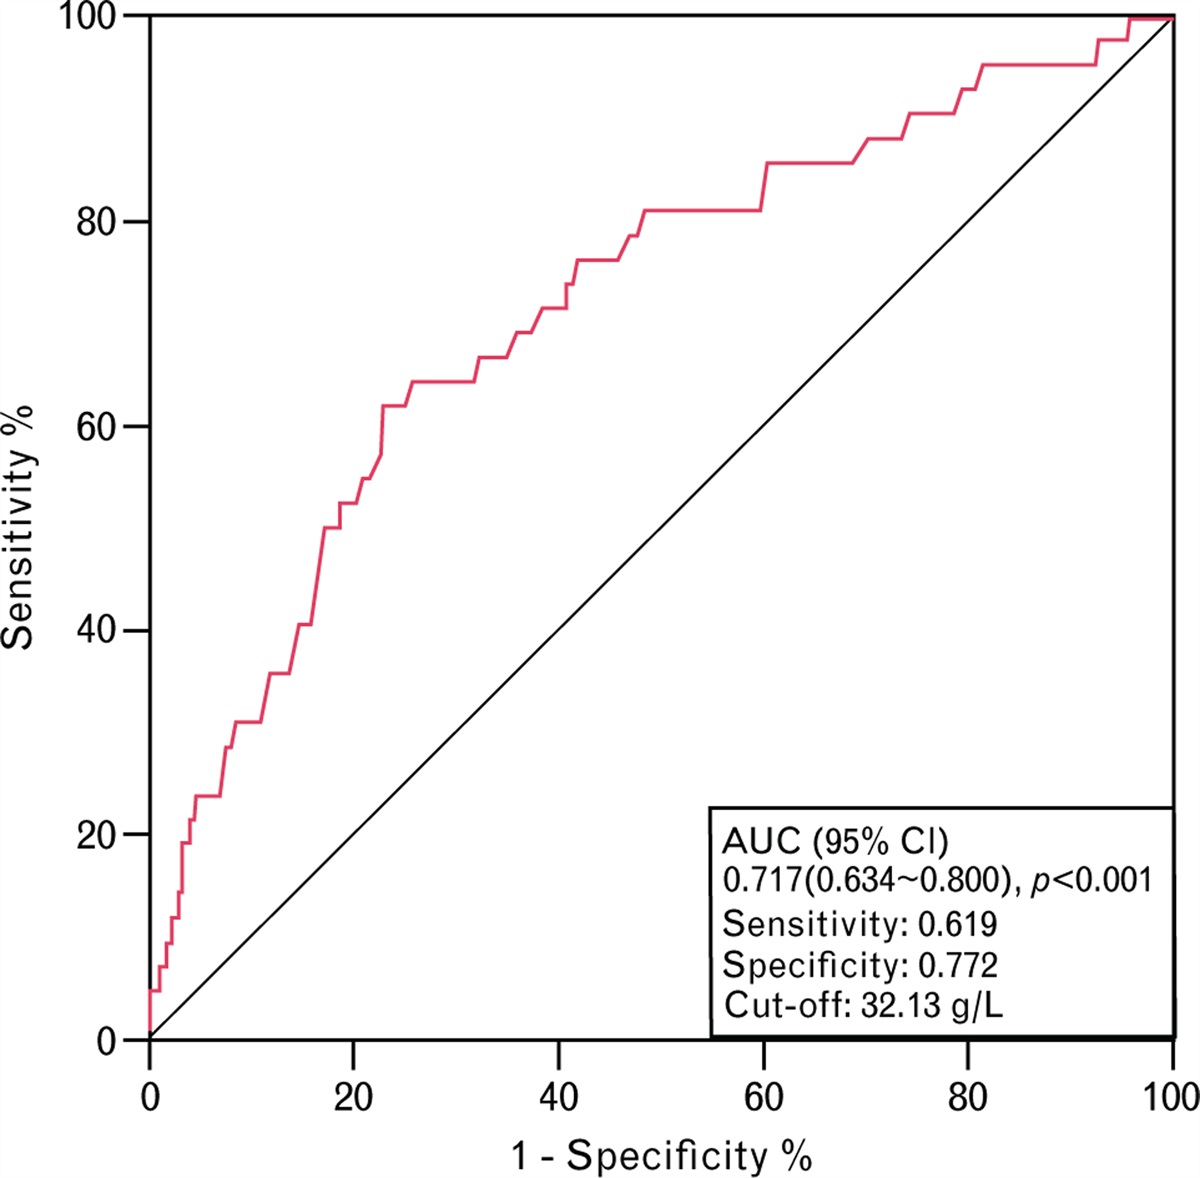 Serum albumin and prognosis in elderly patients with nonischemic dilated cardiomyopathy